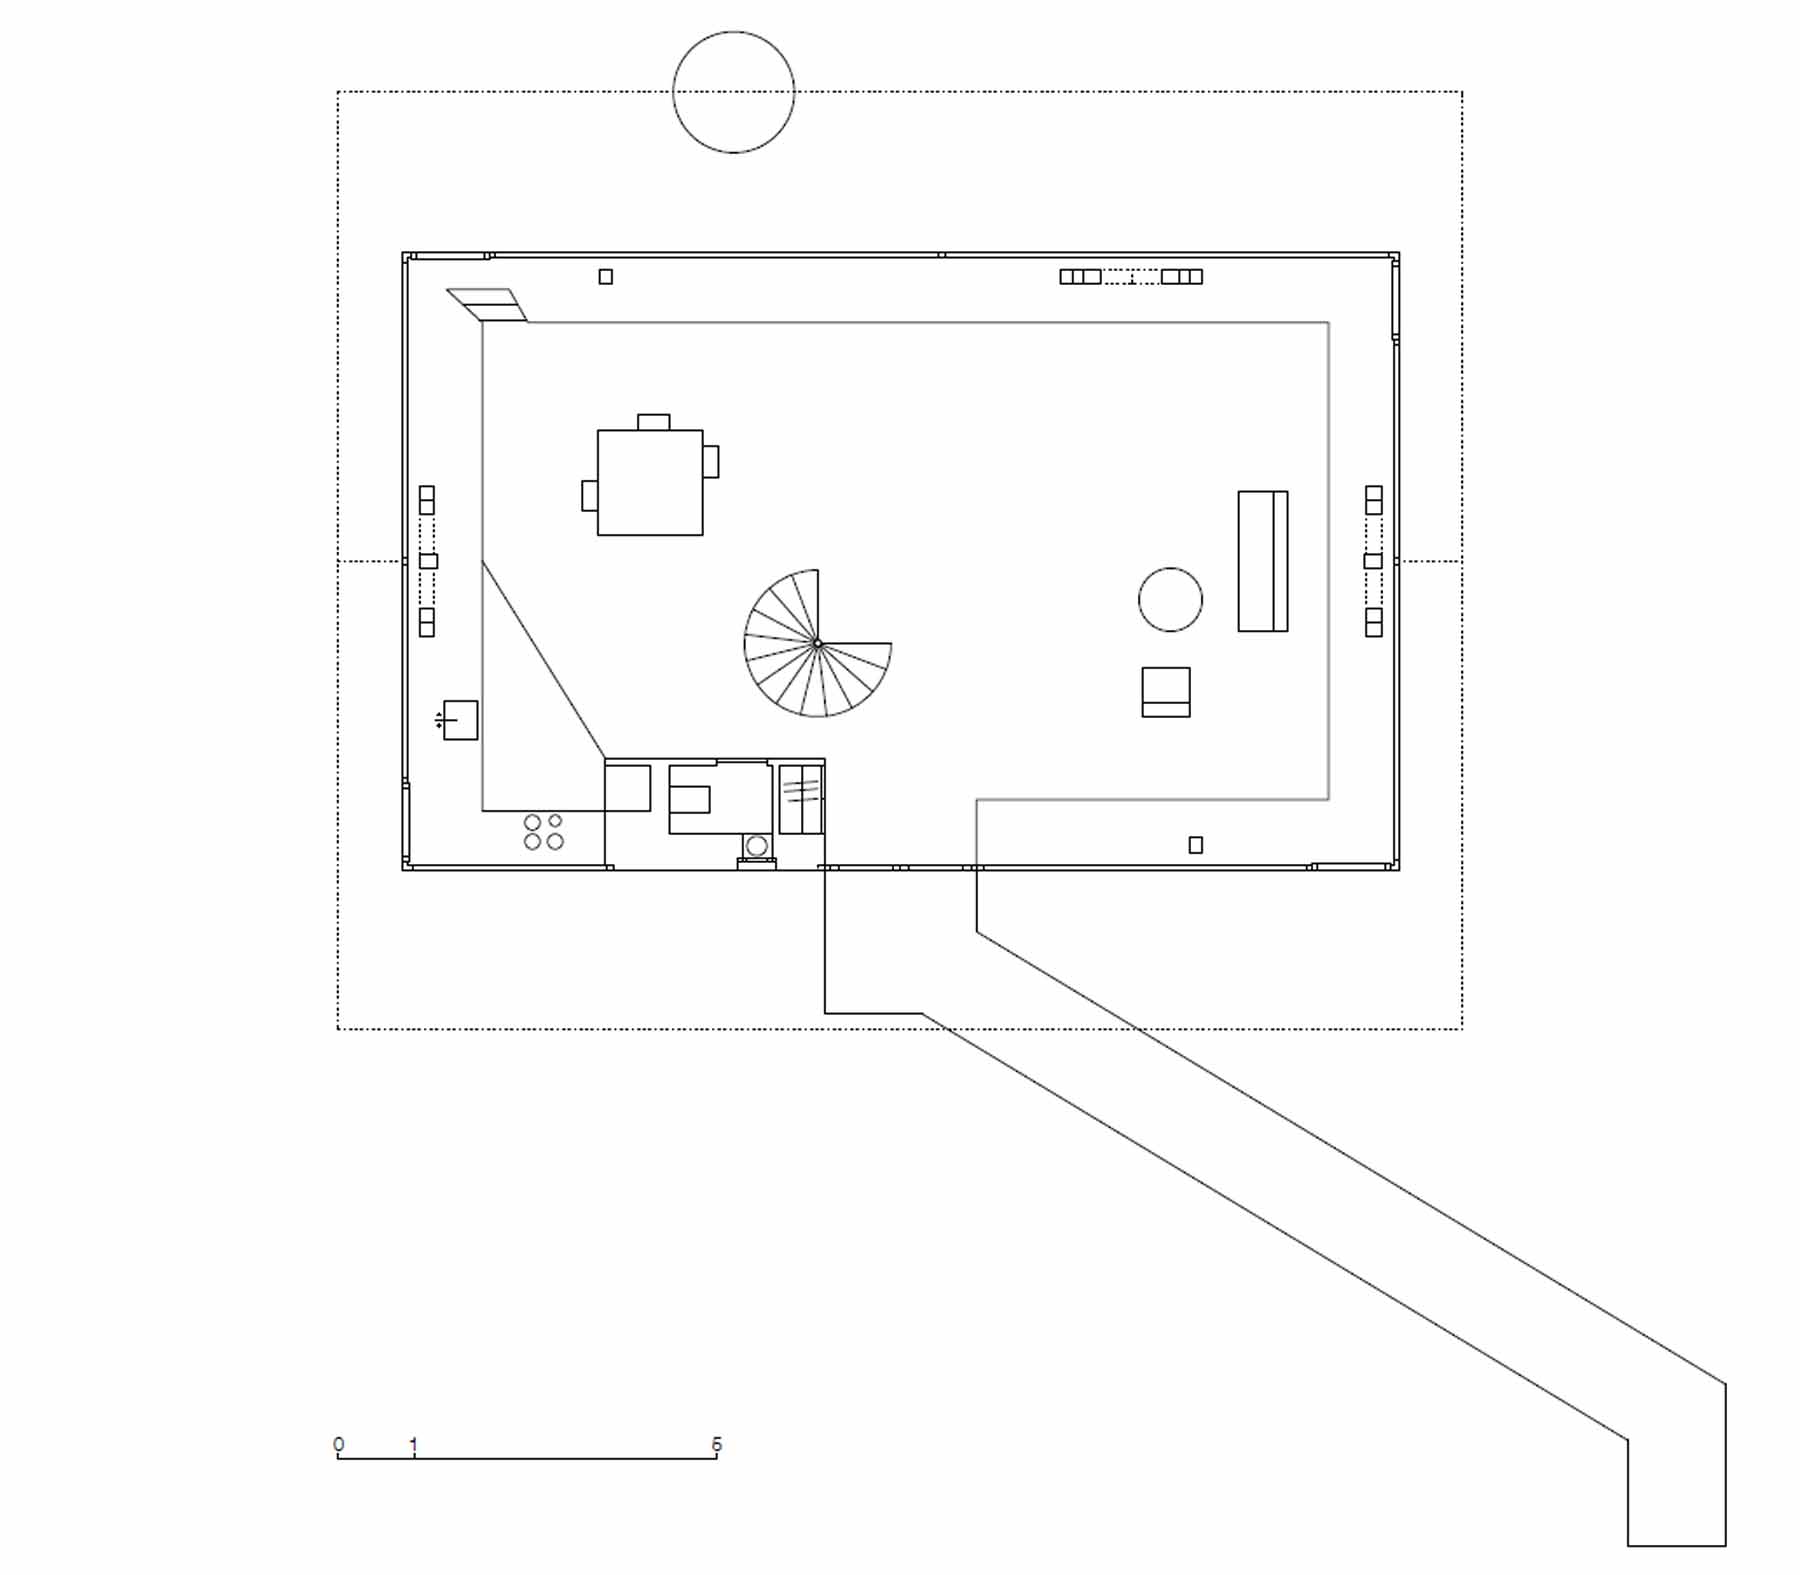 Ground Floor Plan, House In Balsthal, Switzerland By Pascal Flammer Architect, 2014